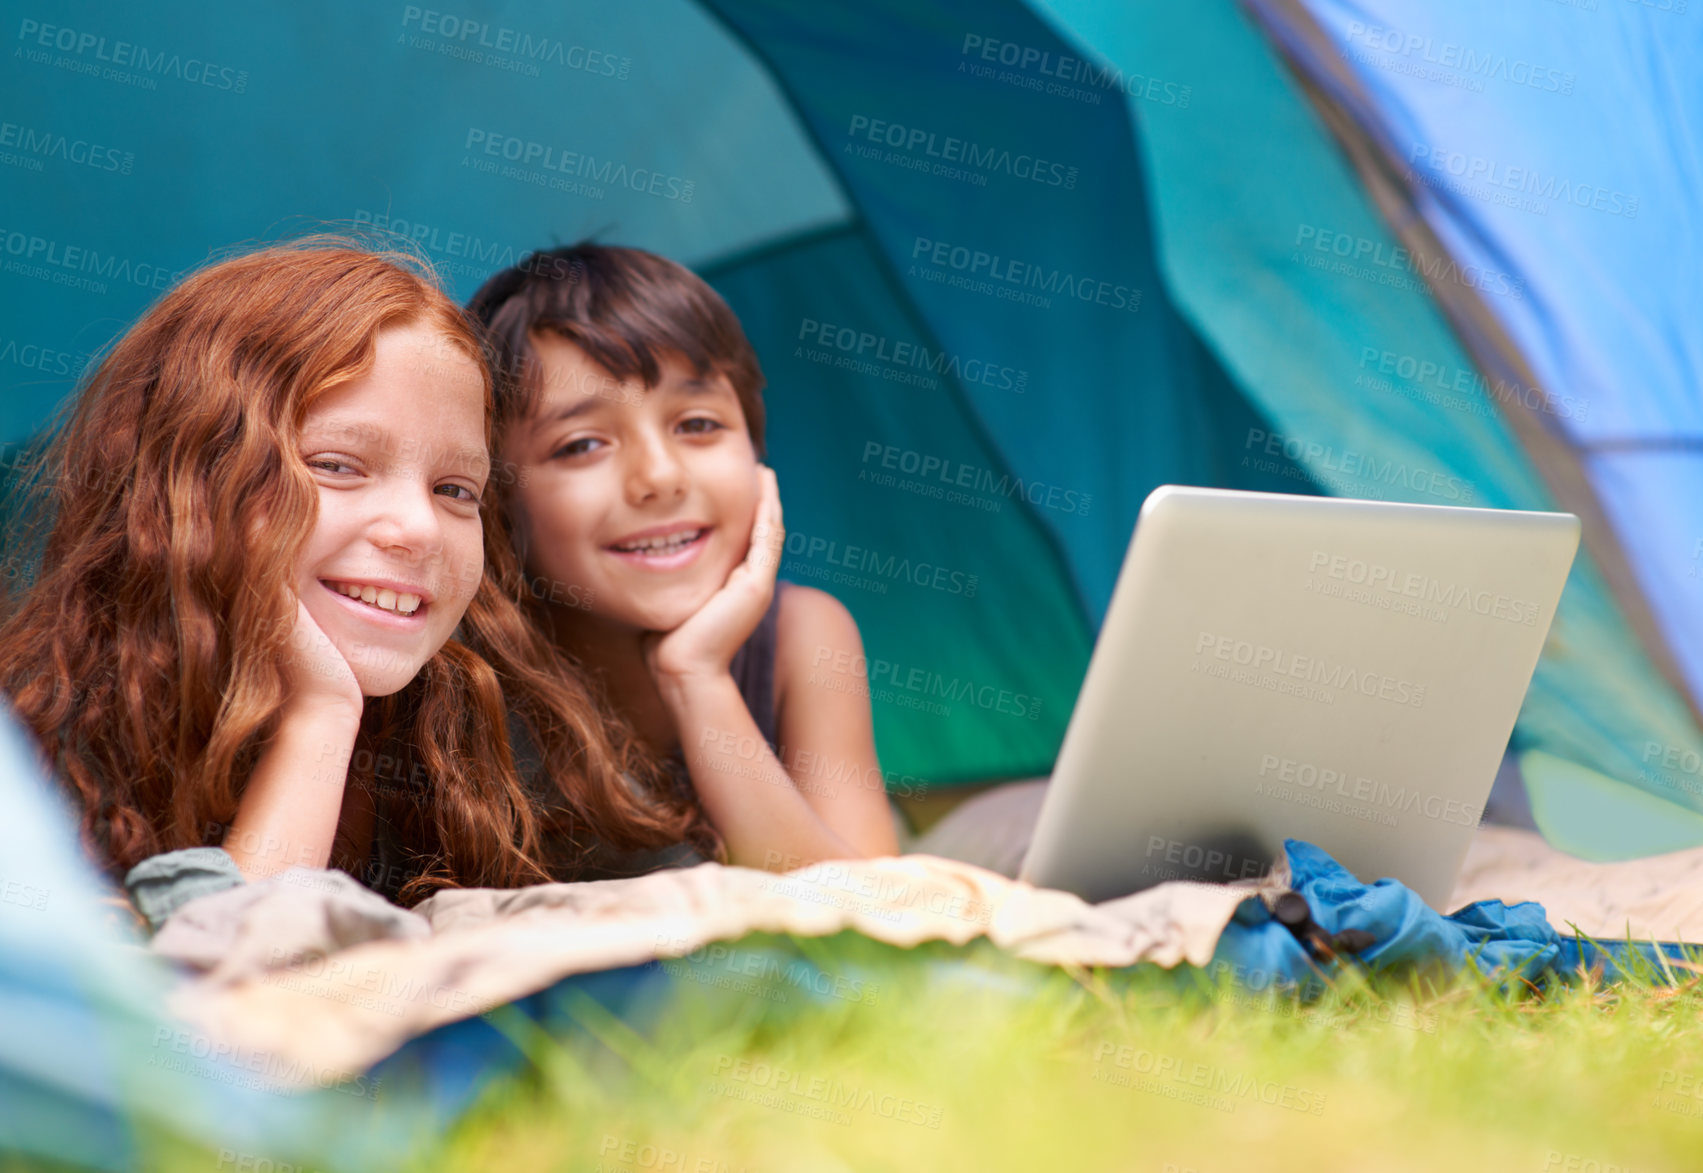 Buy stock photo Kids, portrait and happy with laptop in tent for camping, social media or online movie with diversity in nature. Family, face and siblings or smile outdoor on grass for trip, relax or holiday fun